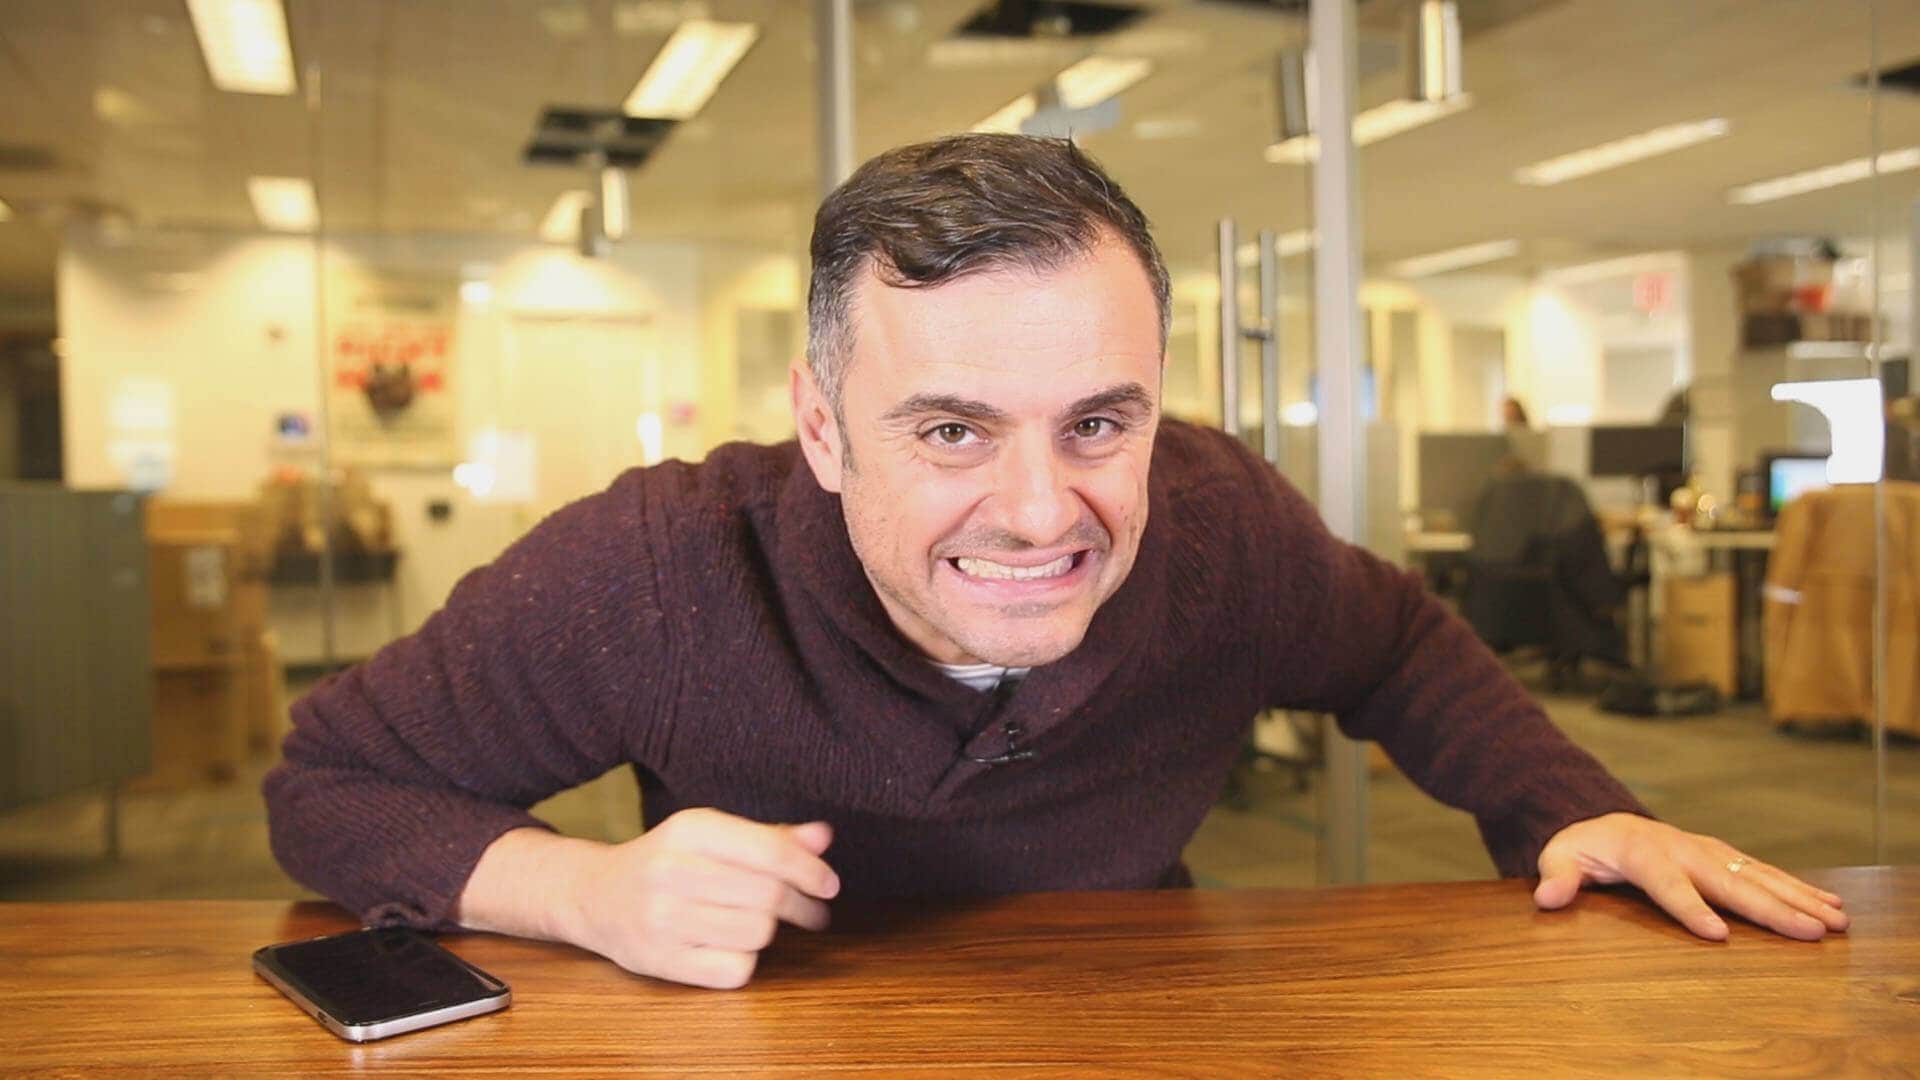 #AskGaryVee Episode 176: Delegating Work, Micromanagement, and Monitoring Employees’ Social Media